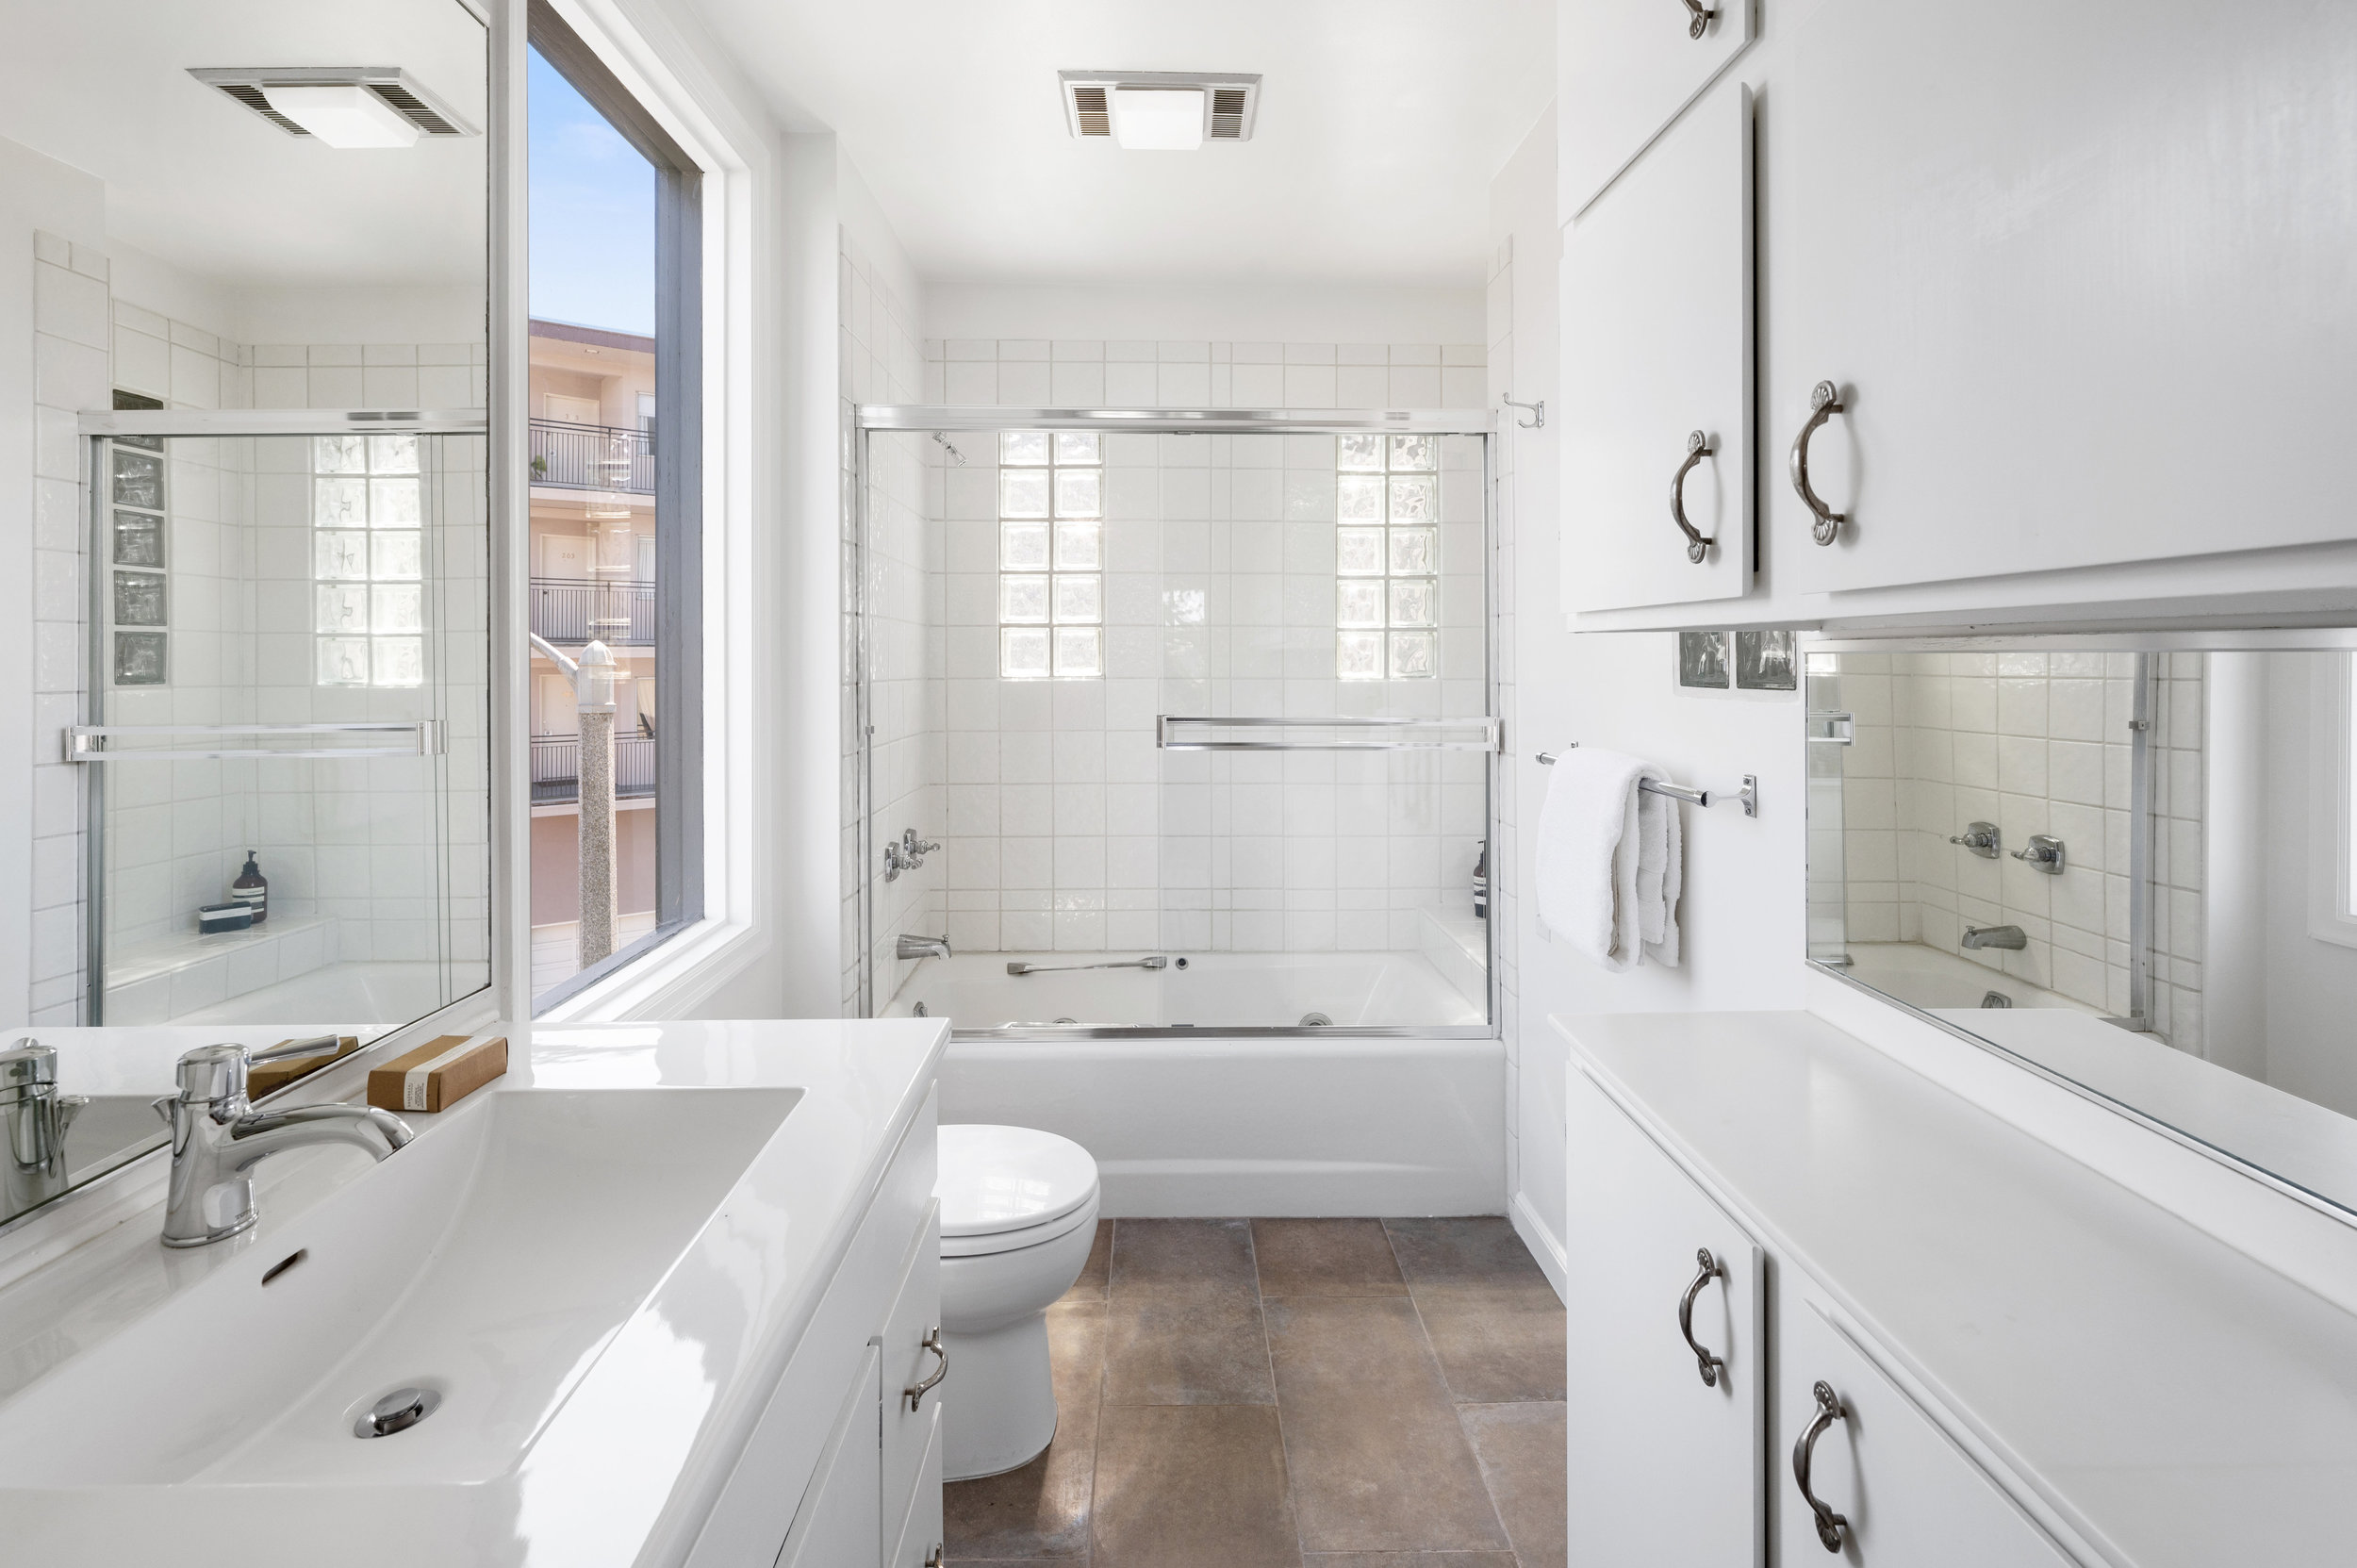 Property Photo: Ensuite bathroom with a large window and bath tub